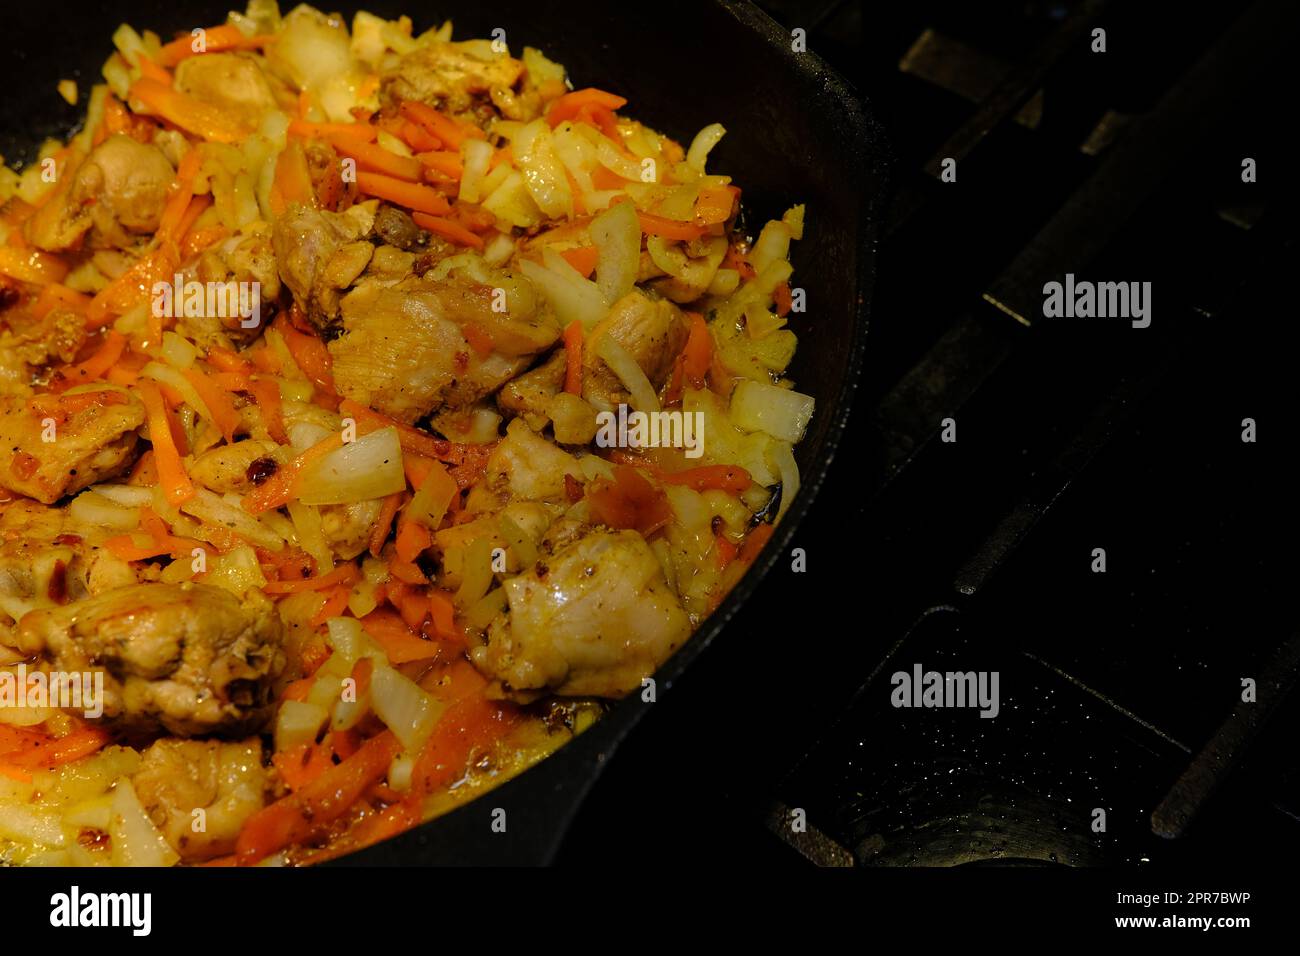 Homemade Korean Spicy chicken dish, frying chiken with carrot in a pan with sunflower oil. Stock Photo